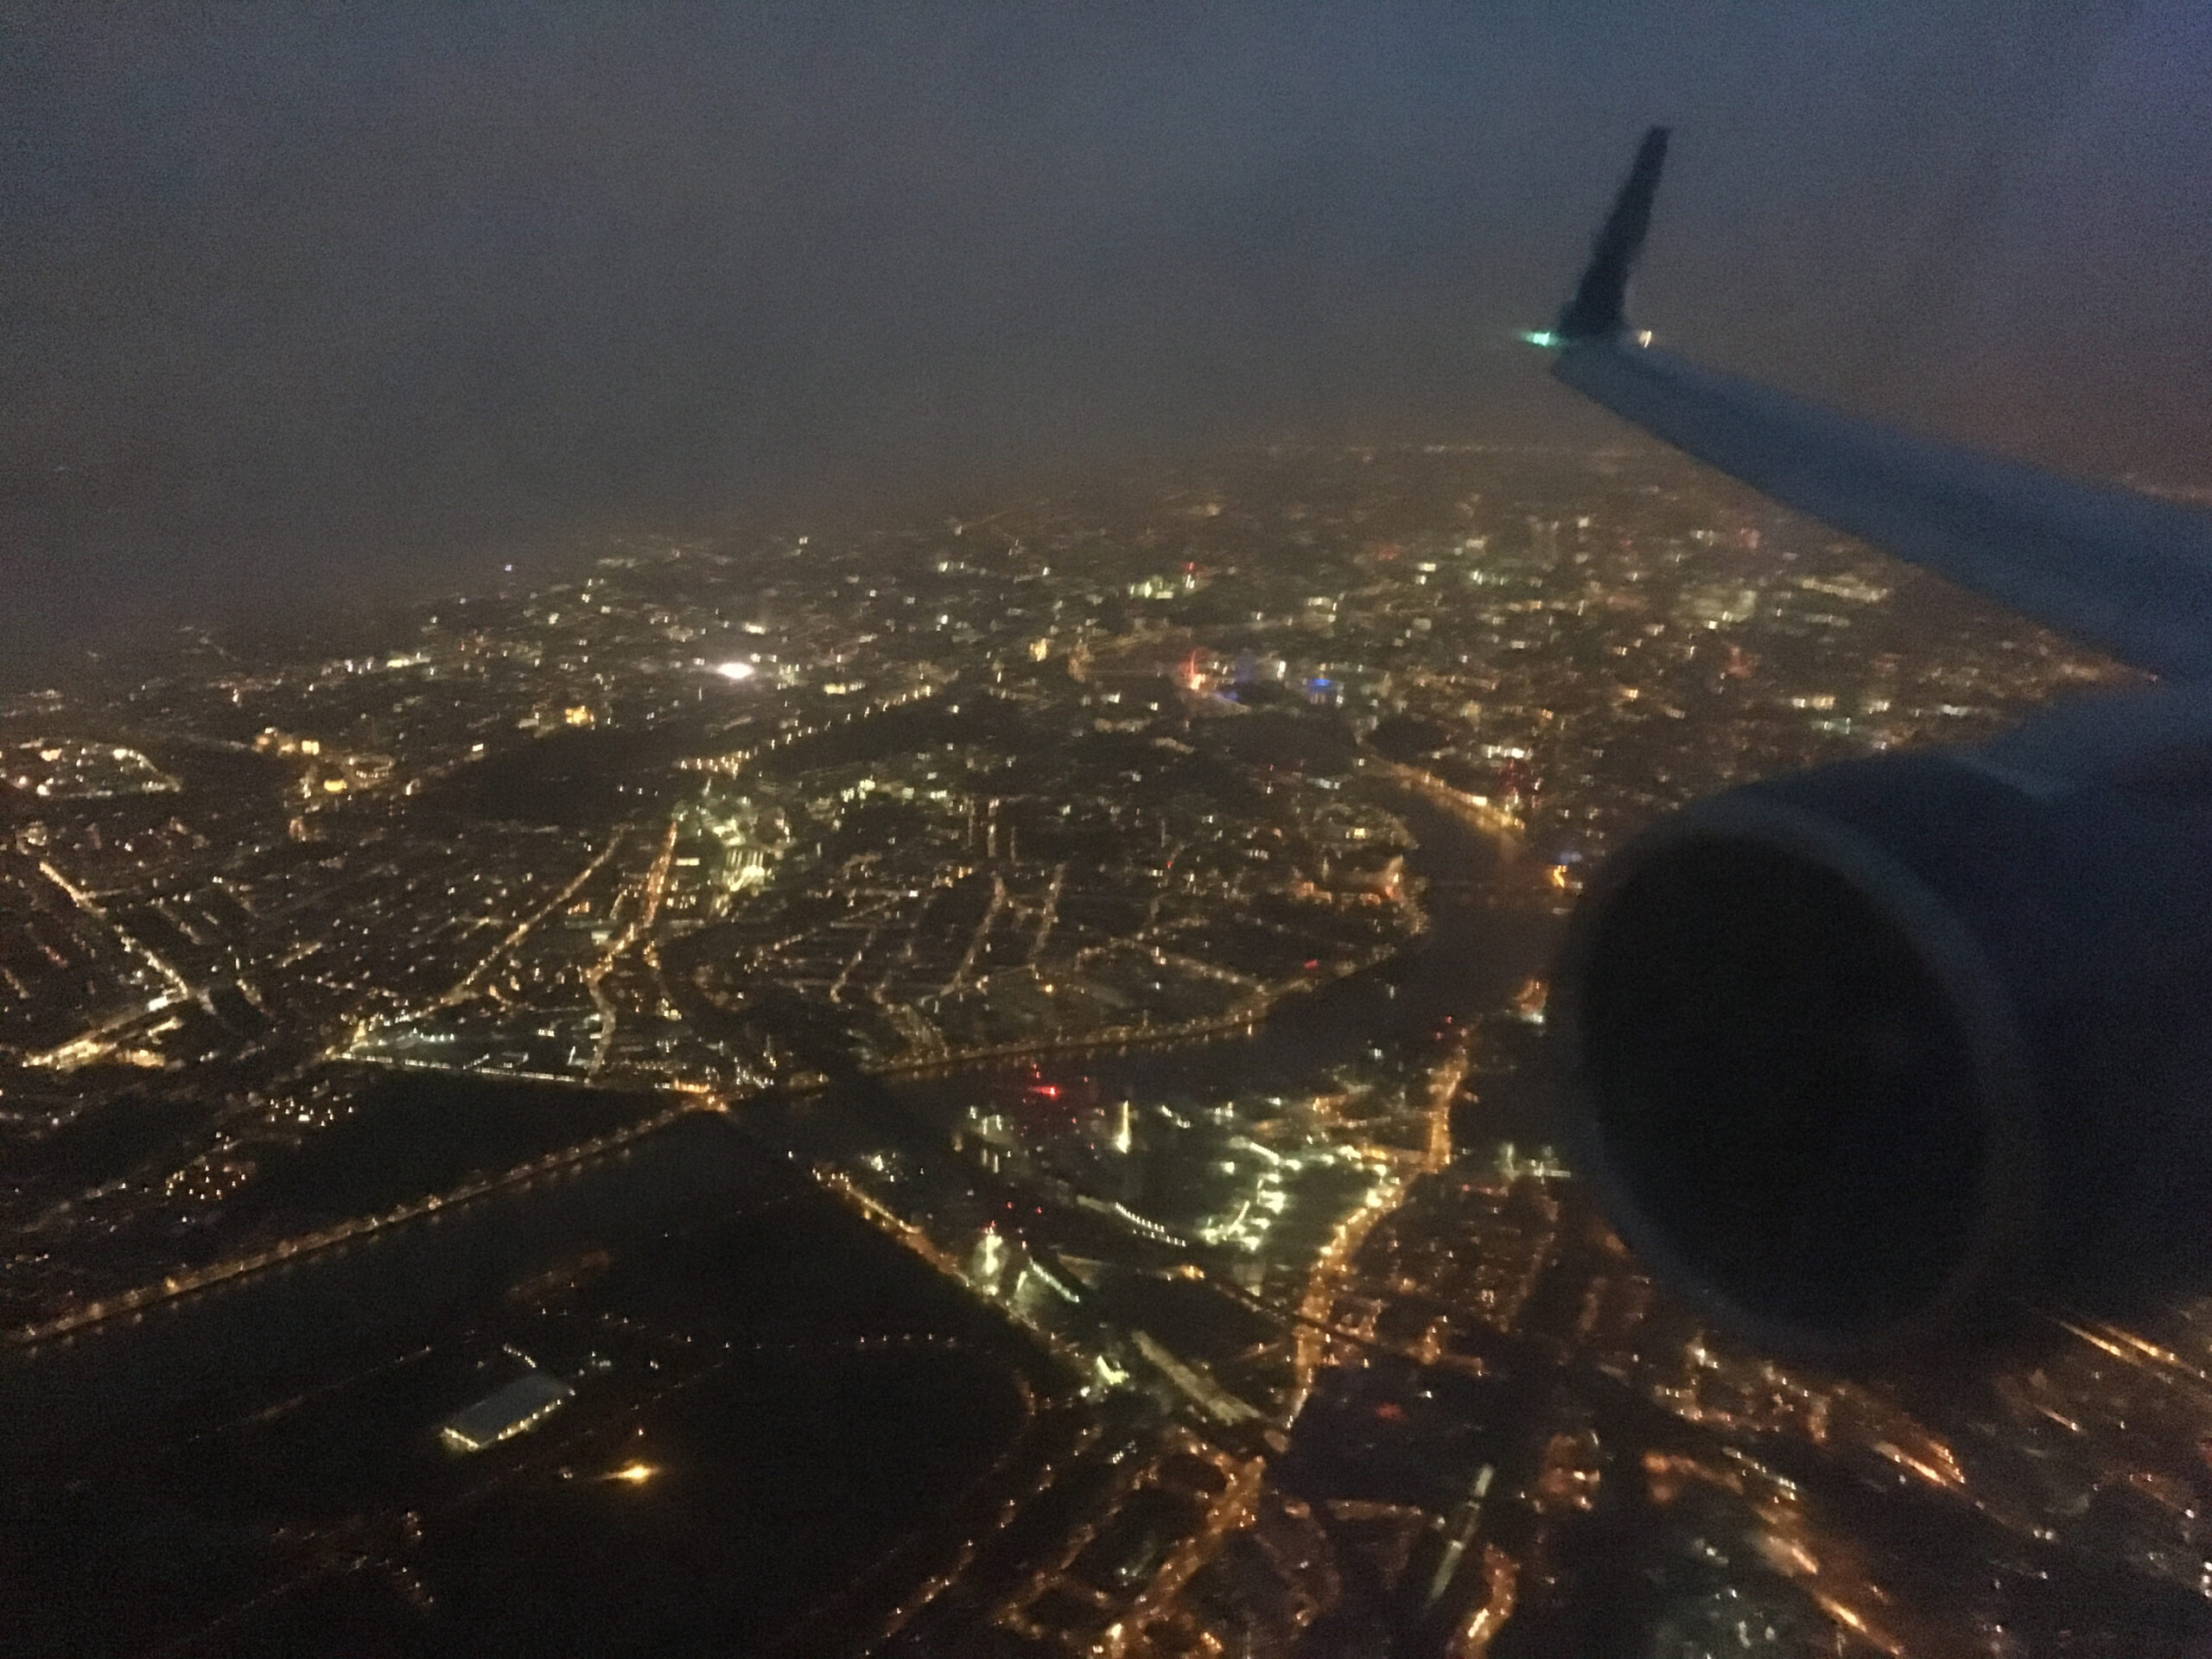 A Delta Airlines jet flies over foggy London, just before sunrise.